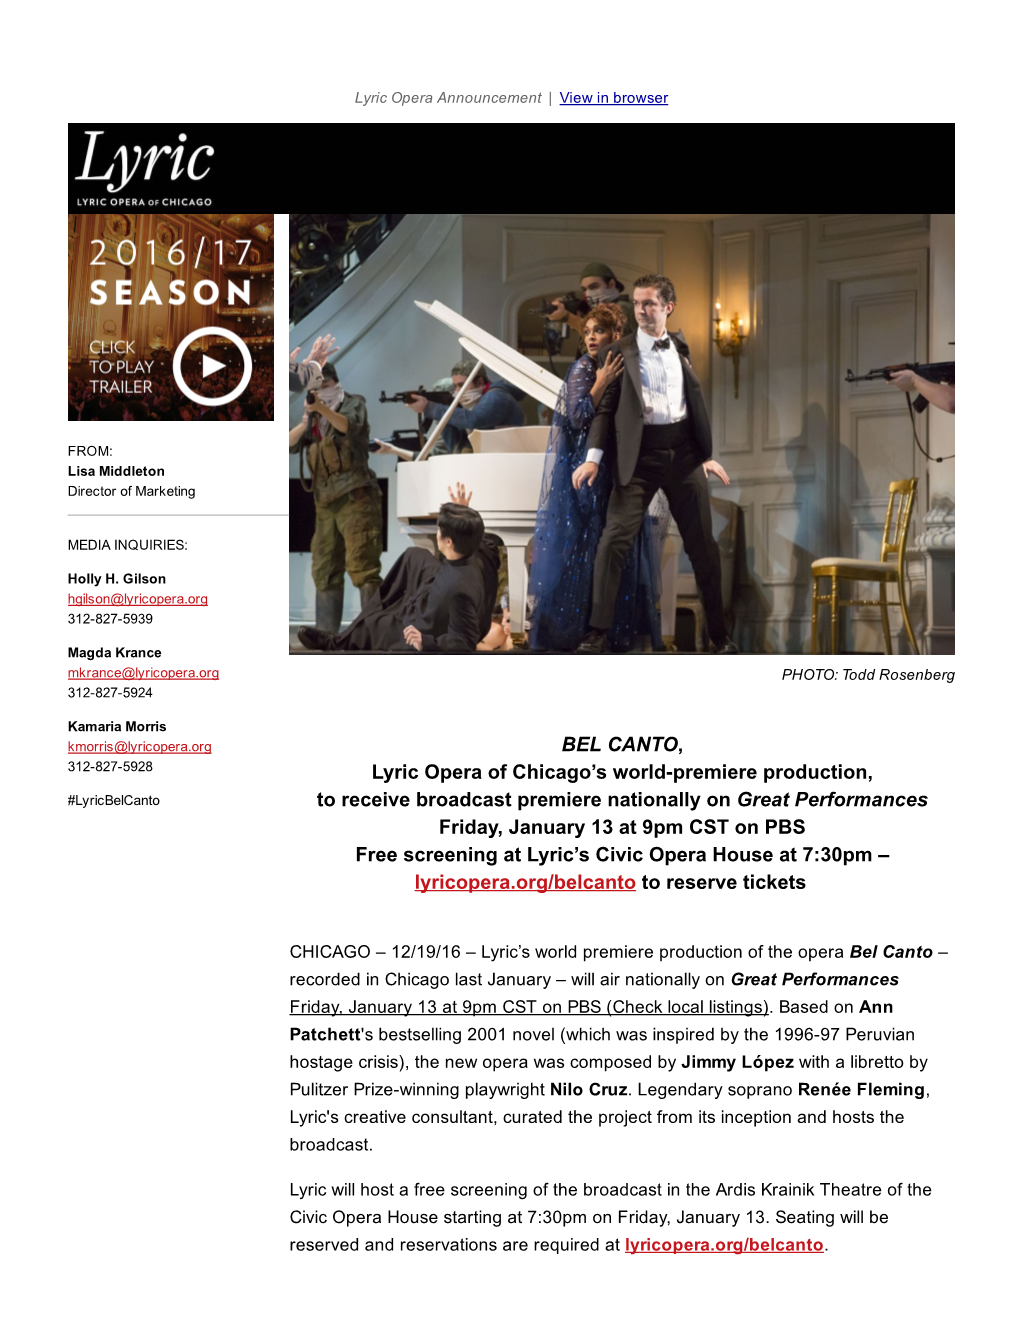 BEL CANTO, Lyric Opera of Chicago's Worldpremiere Production, To